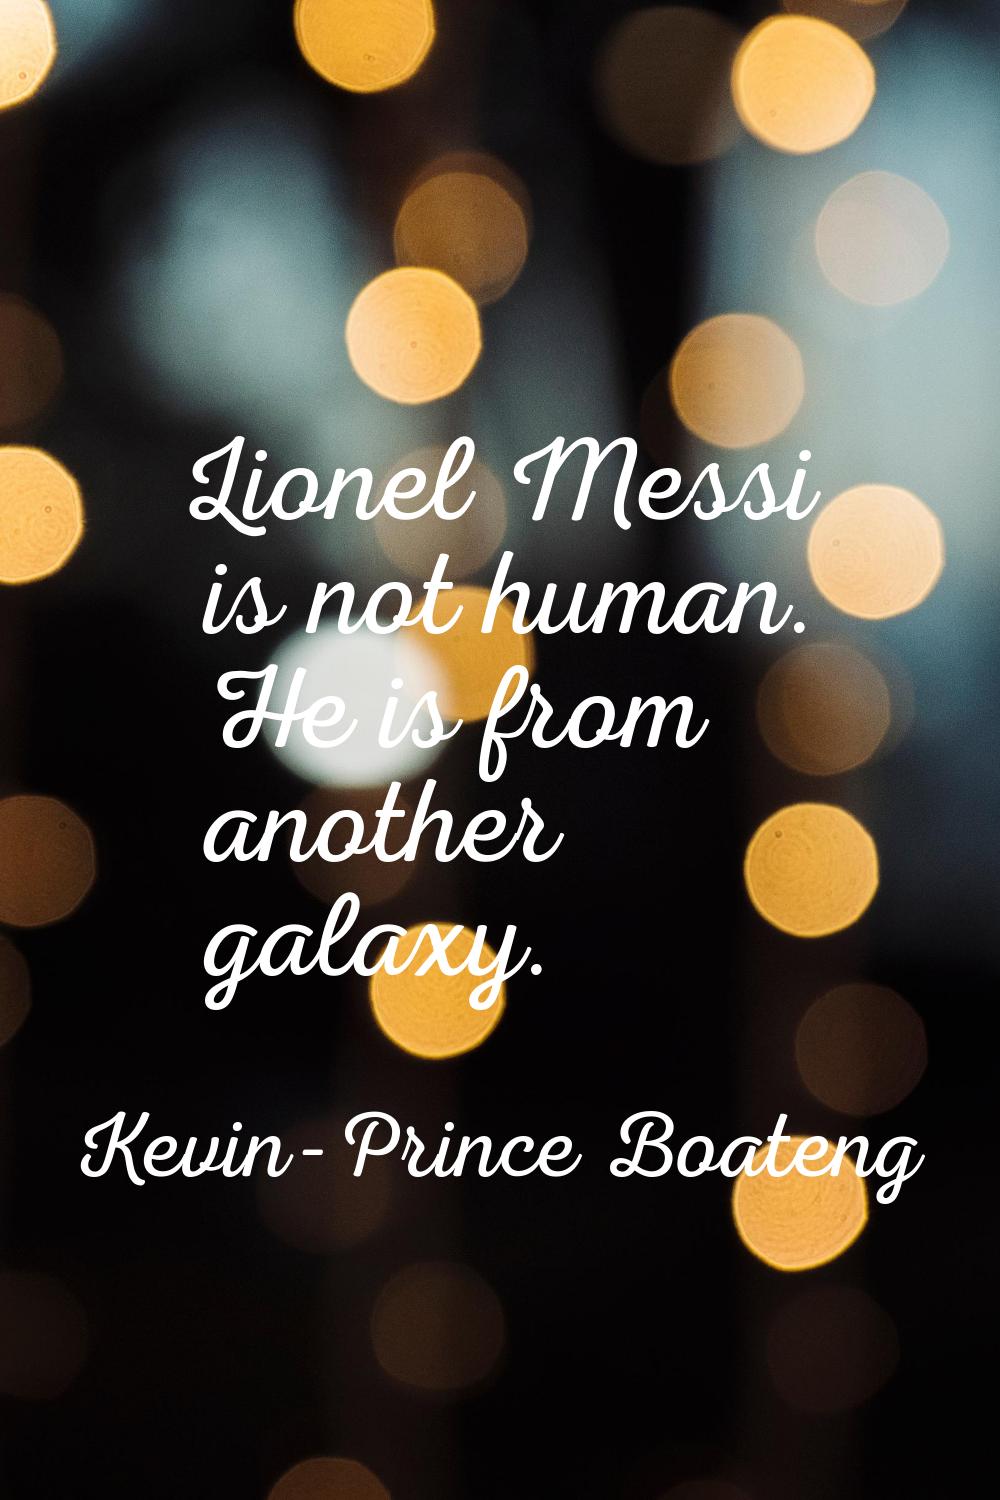 Lionel Messi is not human. He is from another galaxy.